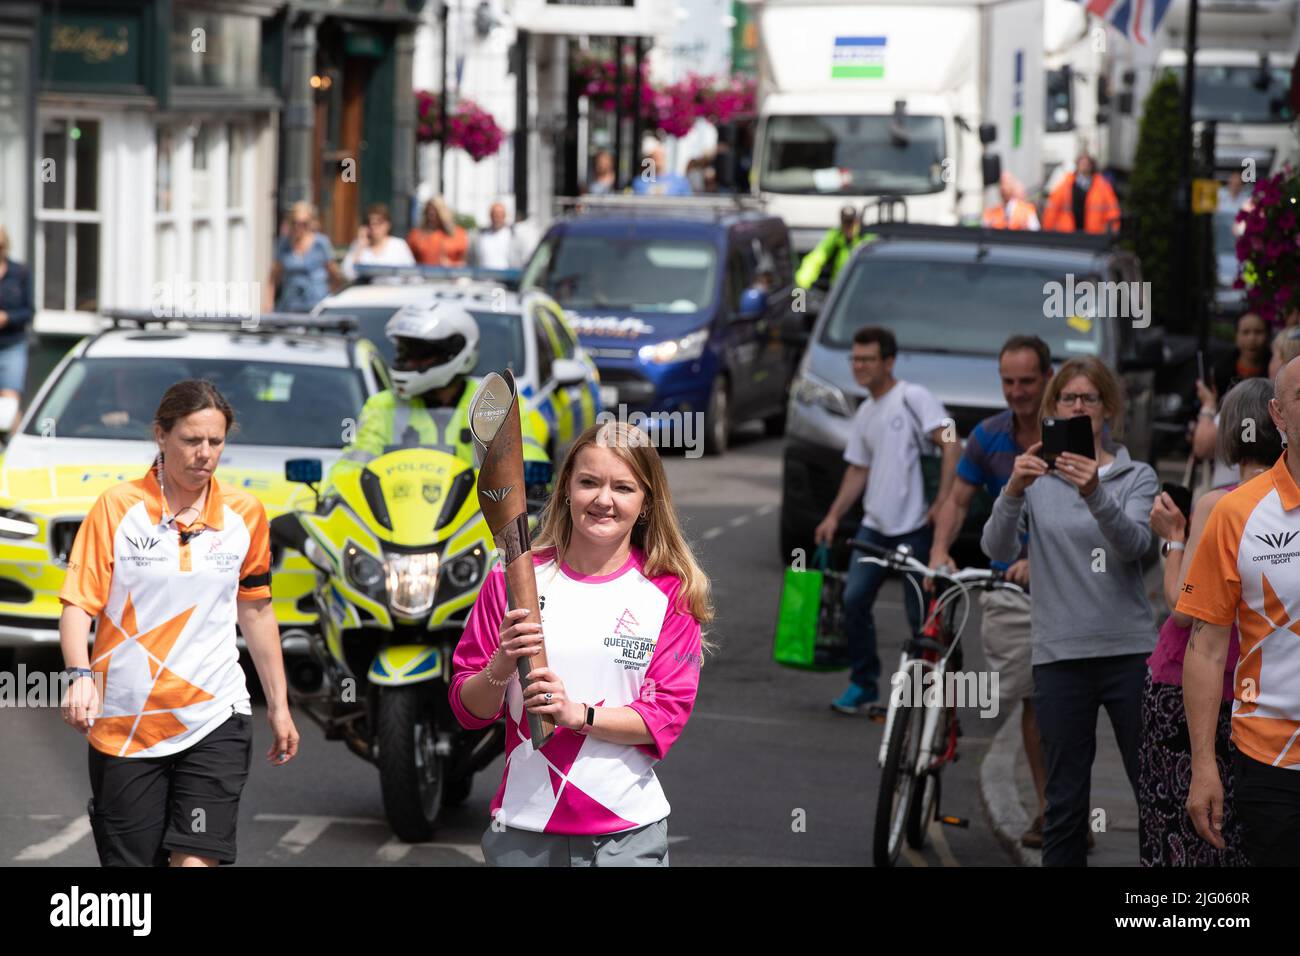 Eton, Windsor, Berkshire, UK. 6th July, 2022. Judo Olympian Ray Stevens carried the baton in Windsor. The Birmingham 2022 Queen's Baton Relay came to Eton High Street and Windsor Bridge this morning. The convoy are travelling to the Isle of Wight next. Credit: Maureen McLean/Alamy Live News. 6th July, 2022. The Birmingham 2022 Queen's Baton Relay came to Eton High Street and Windsor Bridge this morning. The convoy are travelling to the Isle of Wight next. Credit: Maureen McLean/Alamy Live News 6th July, 2022. A Police escort for The Birmingham 2022 Queen's Baton Relay which came to Eton High S Stock Photo